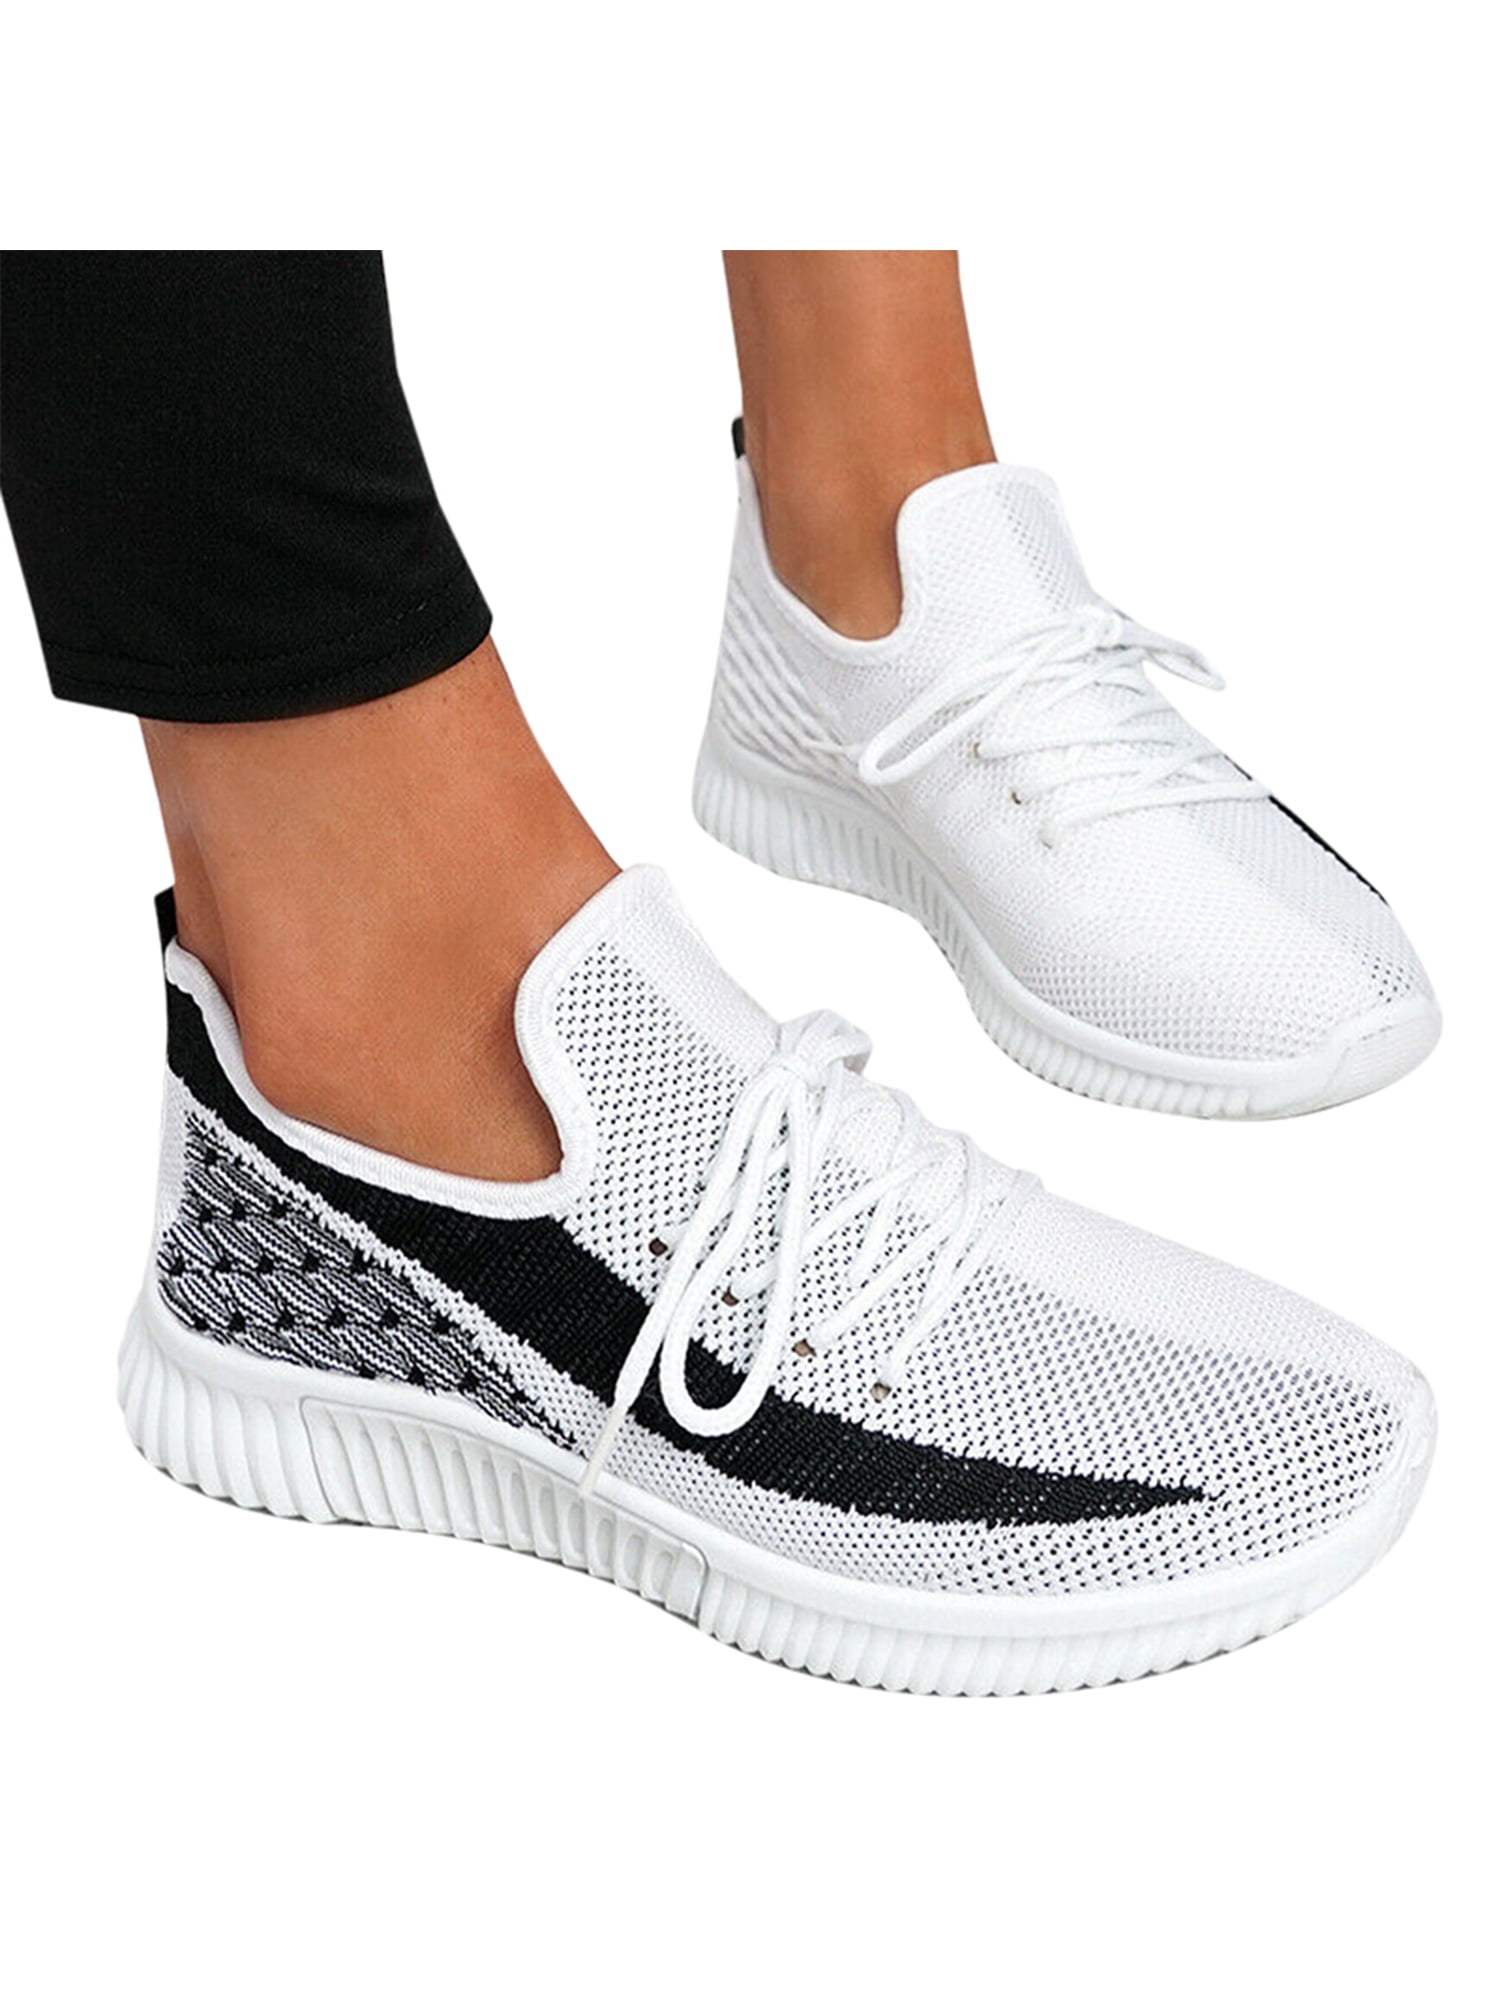 Womens Casual Lace Up Trainer Mesh 